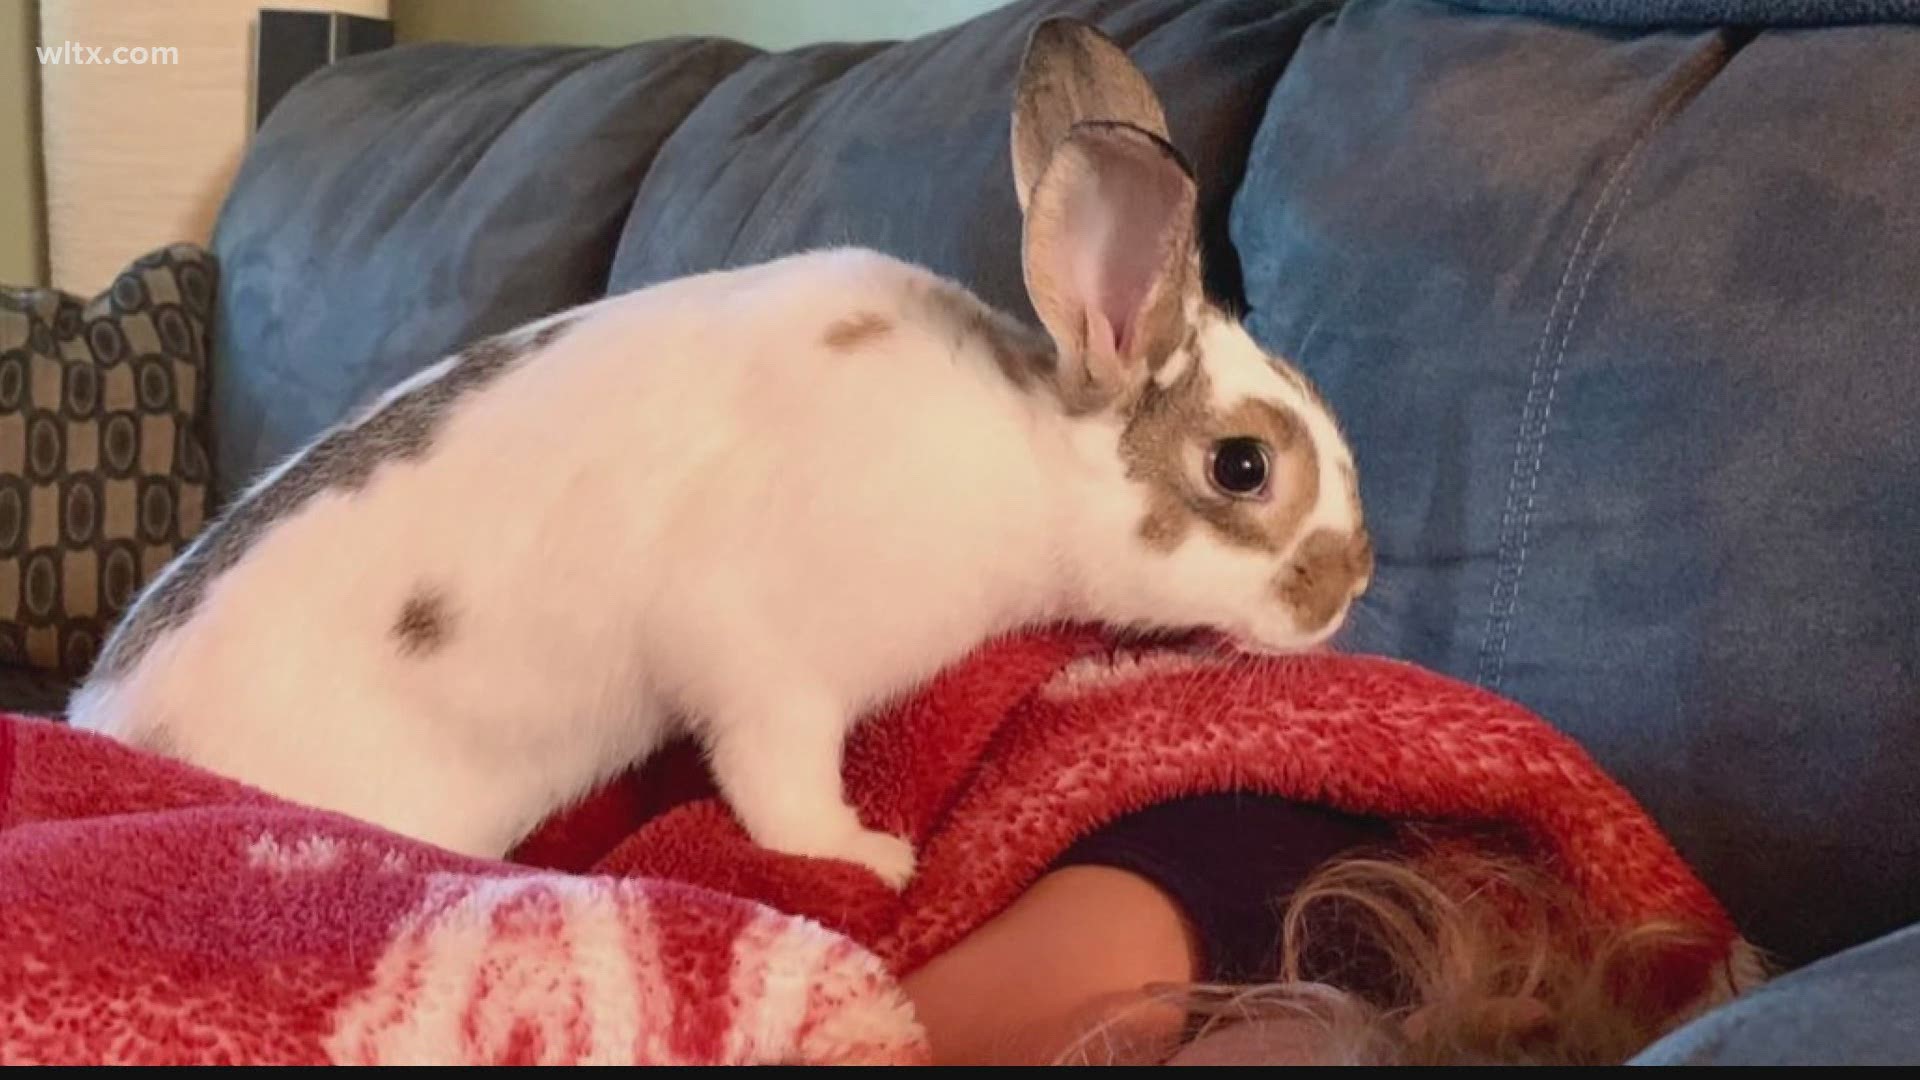 Emma Nance's pet rabbit passed away so she wanted to give part of her chore-money to a rabbit rescue.